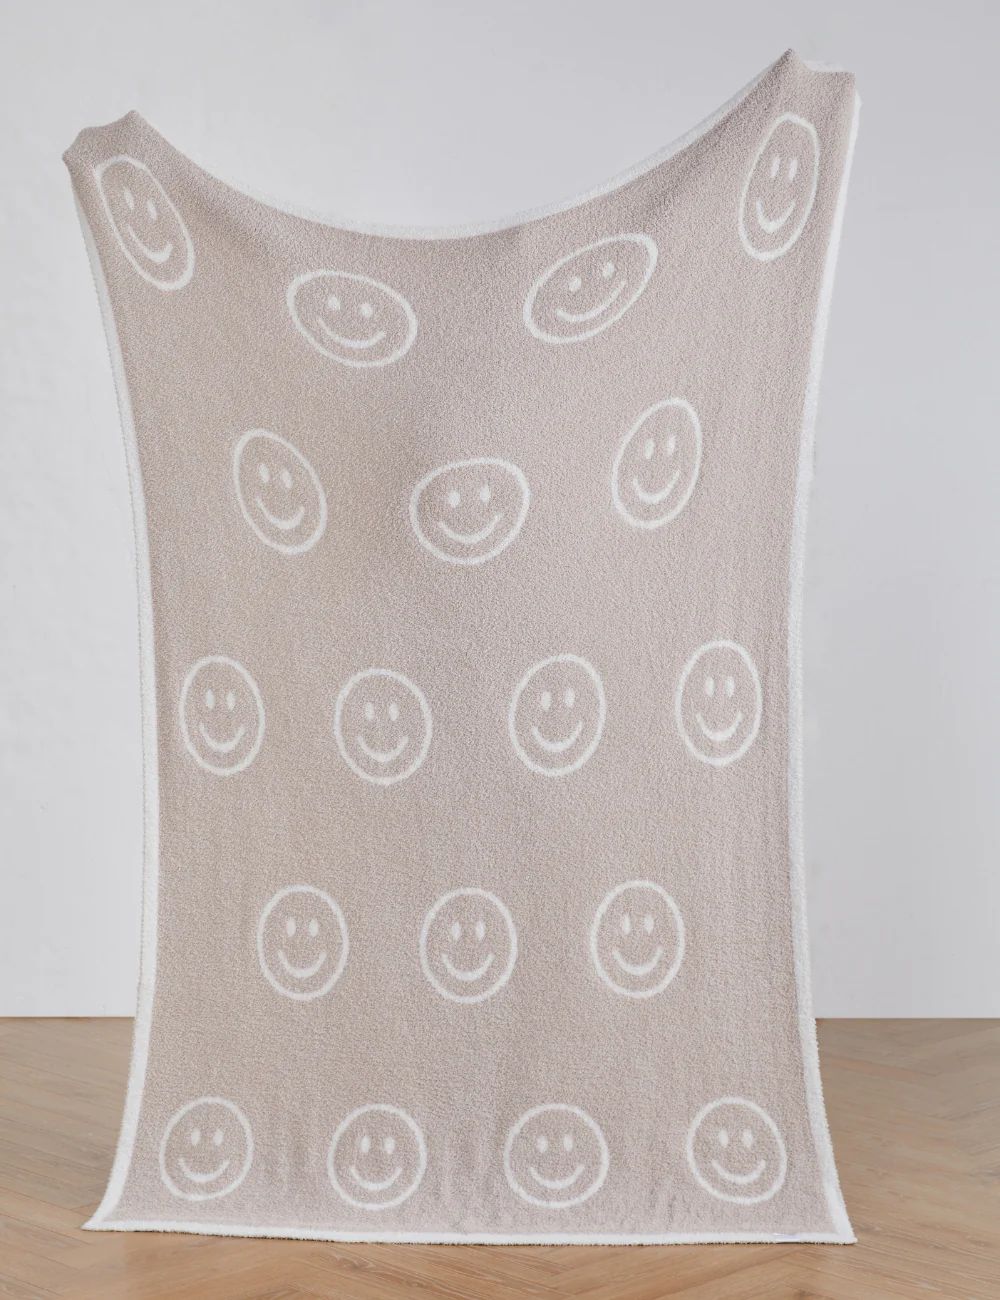 Smiley Buttery Blanket | The Styled Collection